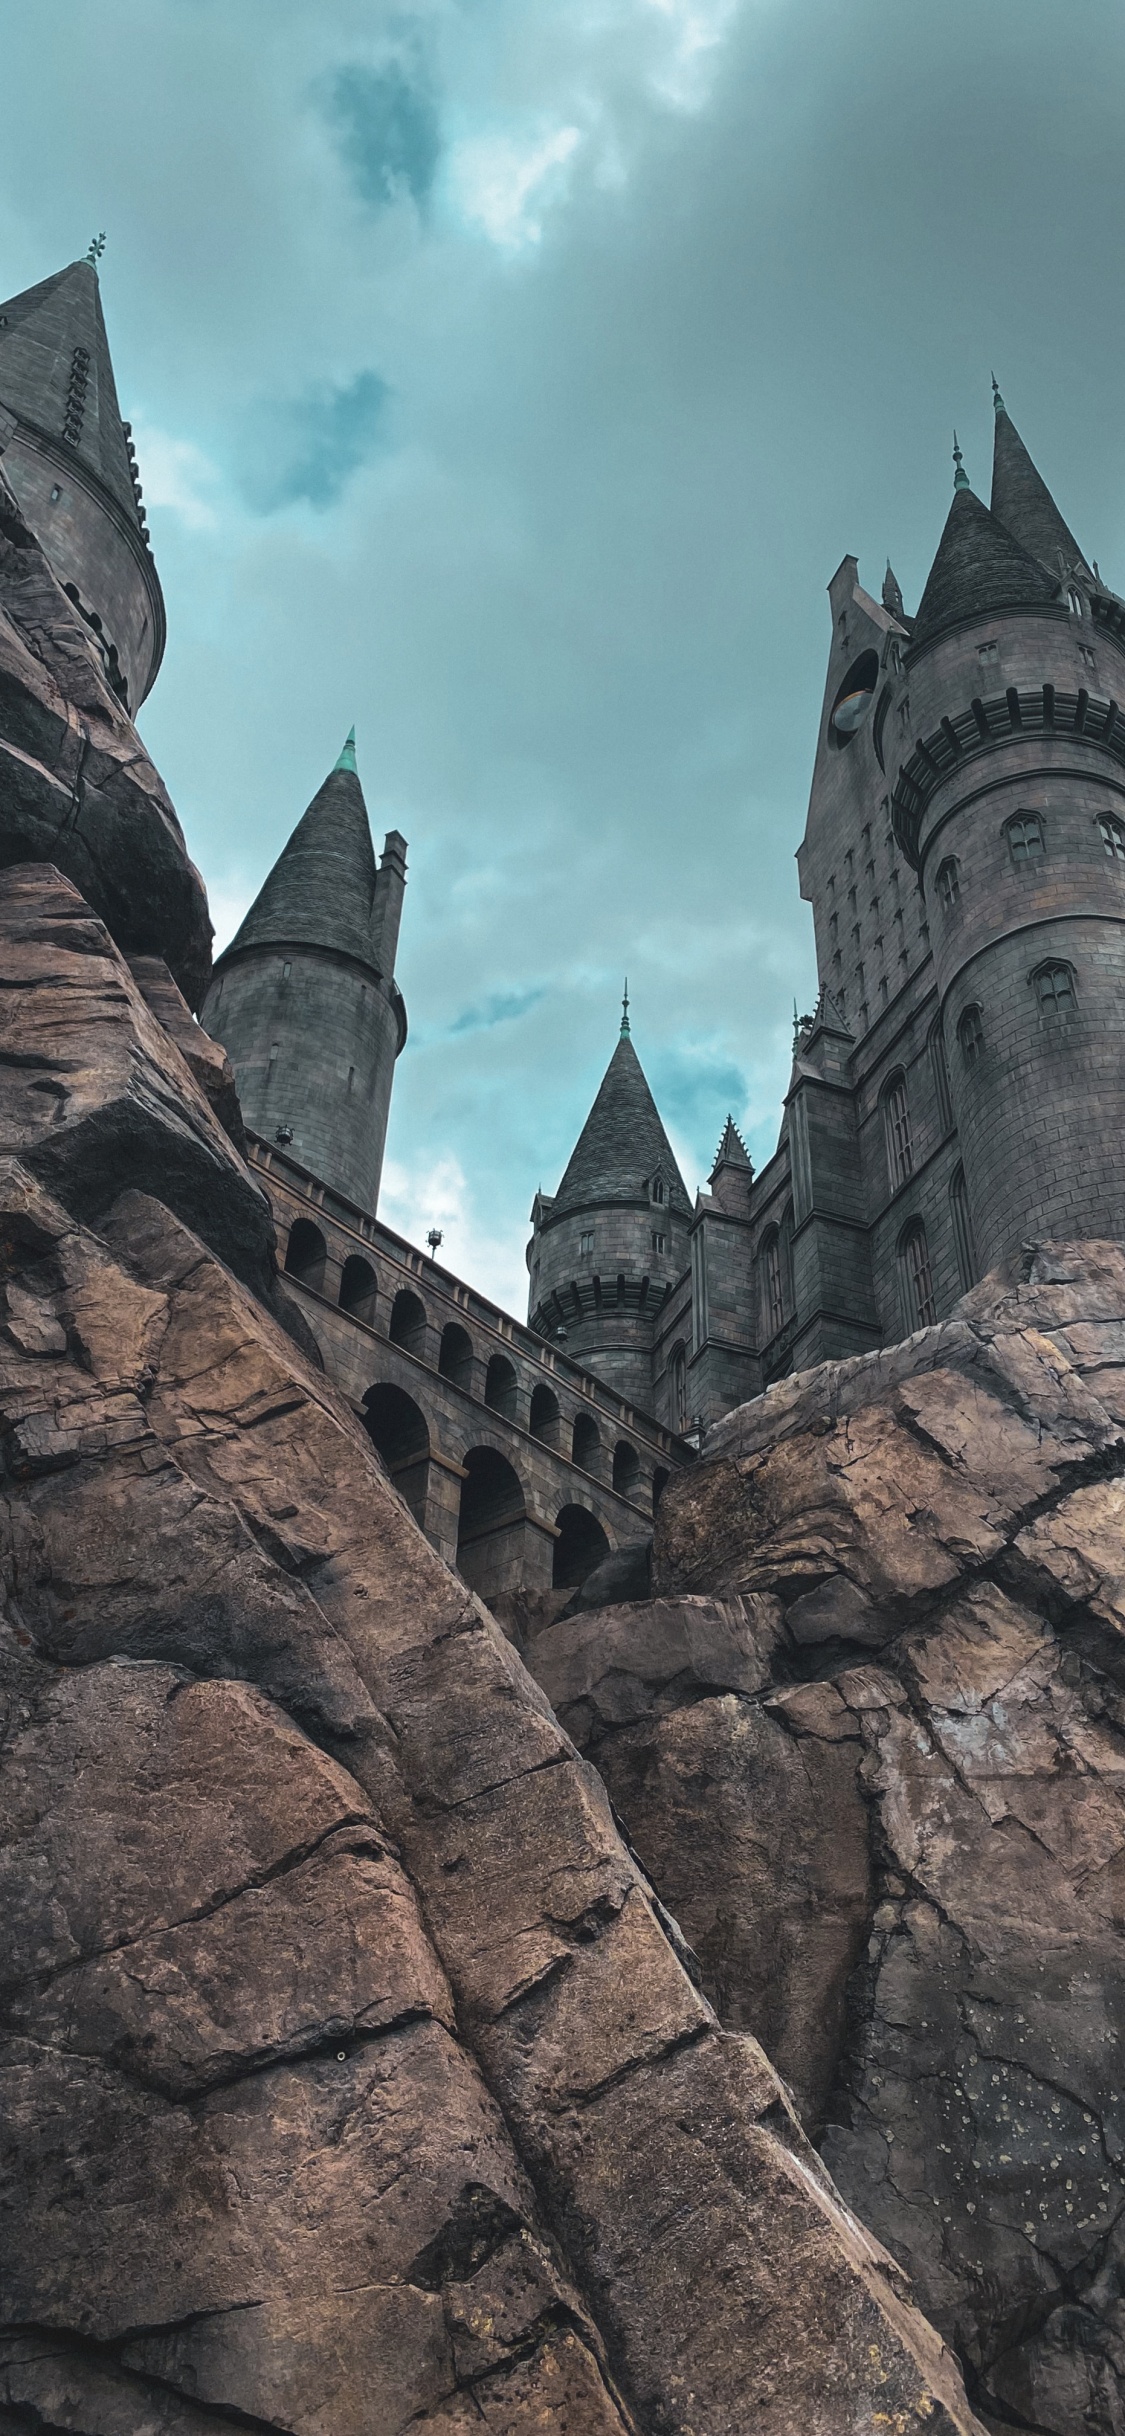 Hogwarts, Scorpius Hyperion Malfoy, Harry Potter, Wizarding World, Slytherin House. Wallpaper in 1125x2436 Resolution